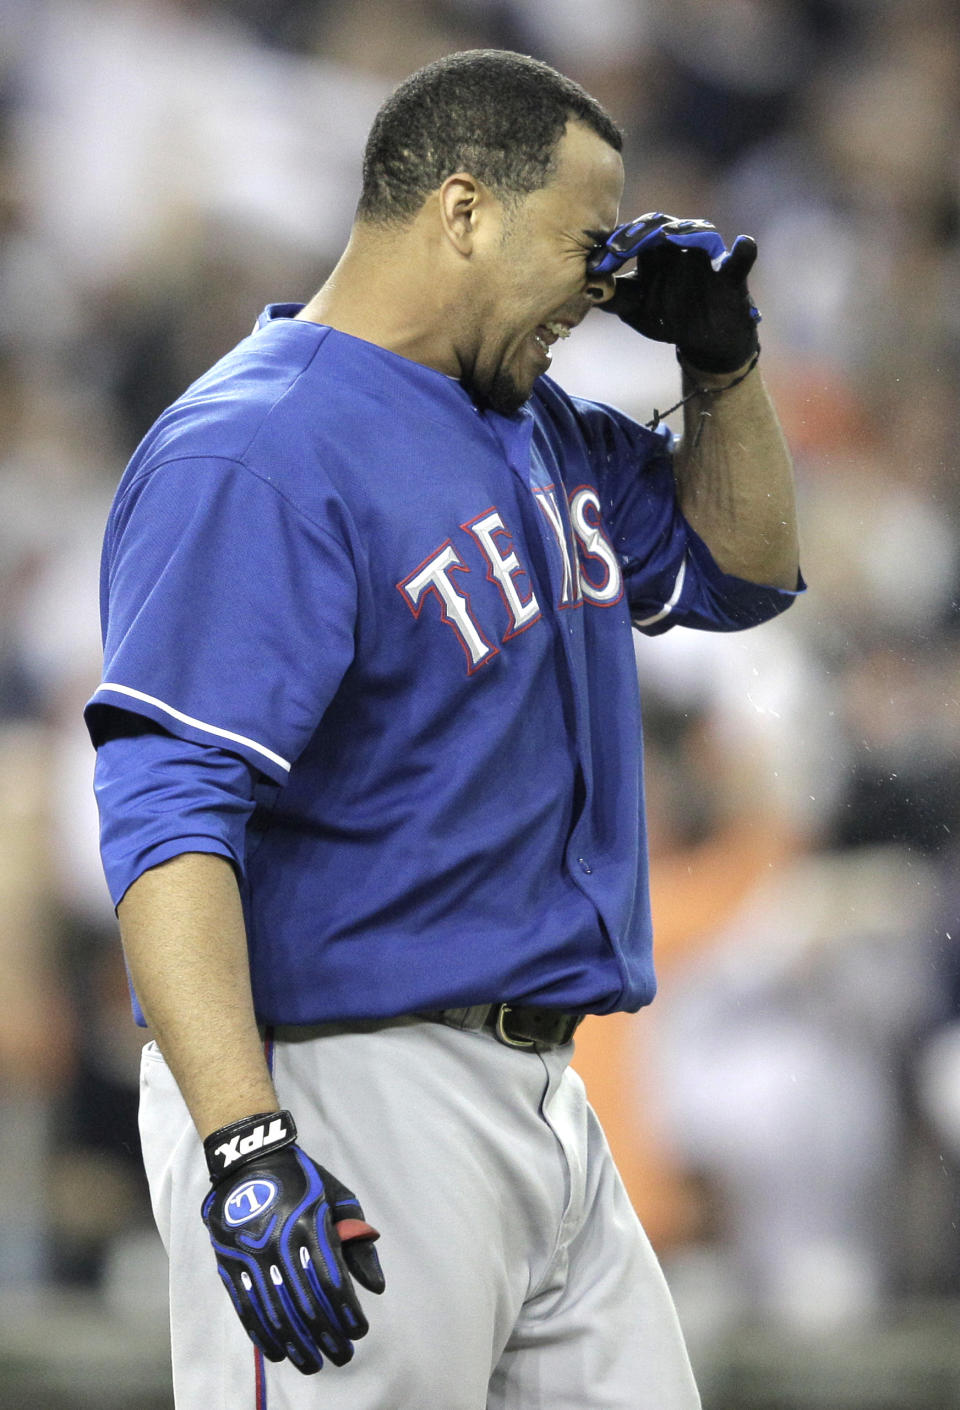 Texas Rangers' Nelson Cruz reacts after striking out in the seventh inning of Game 3 of baseball's American League championship series against the Detroit Tigers, Tuesday, Oct. 11, 2011, in Detroit. (AP Photo/Charlie Riedel)